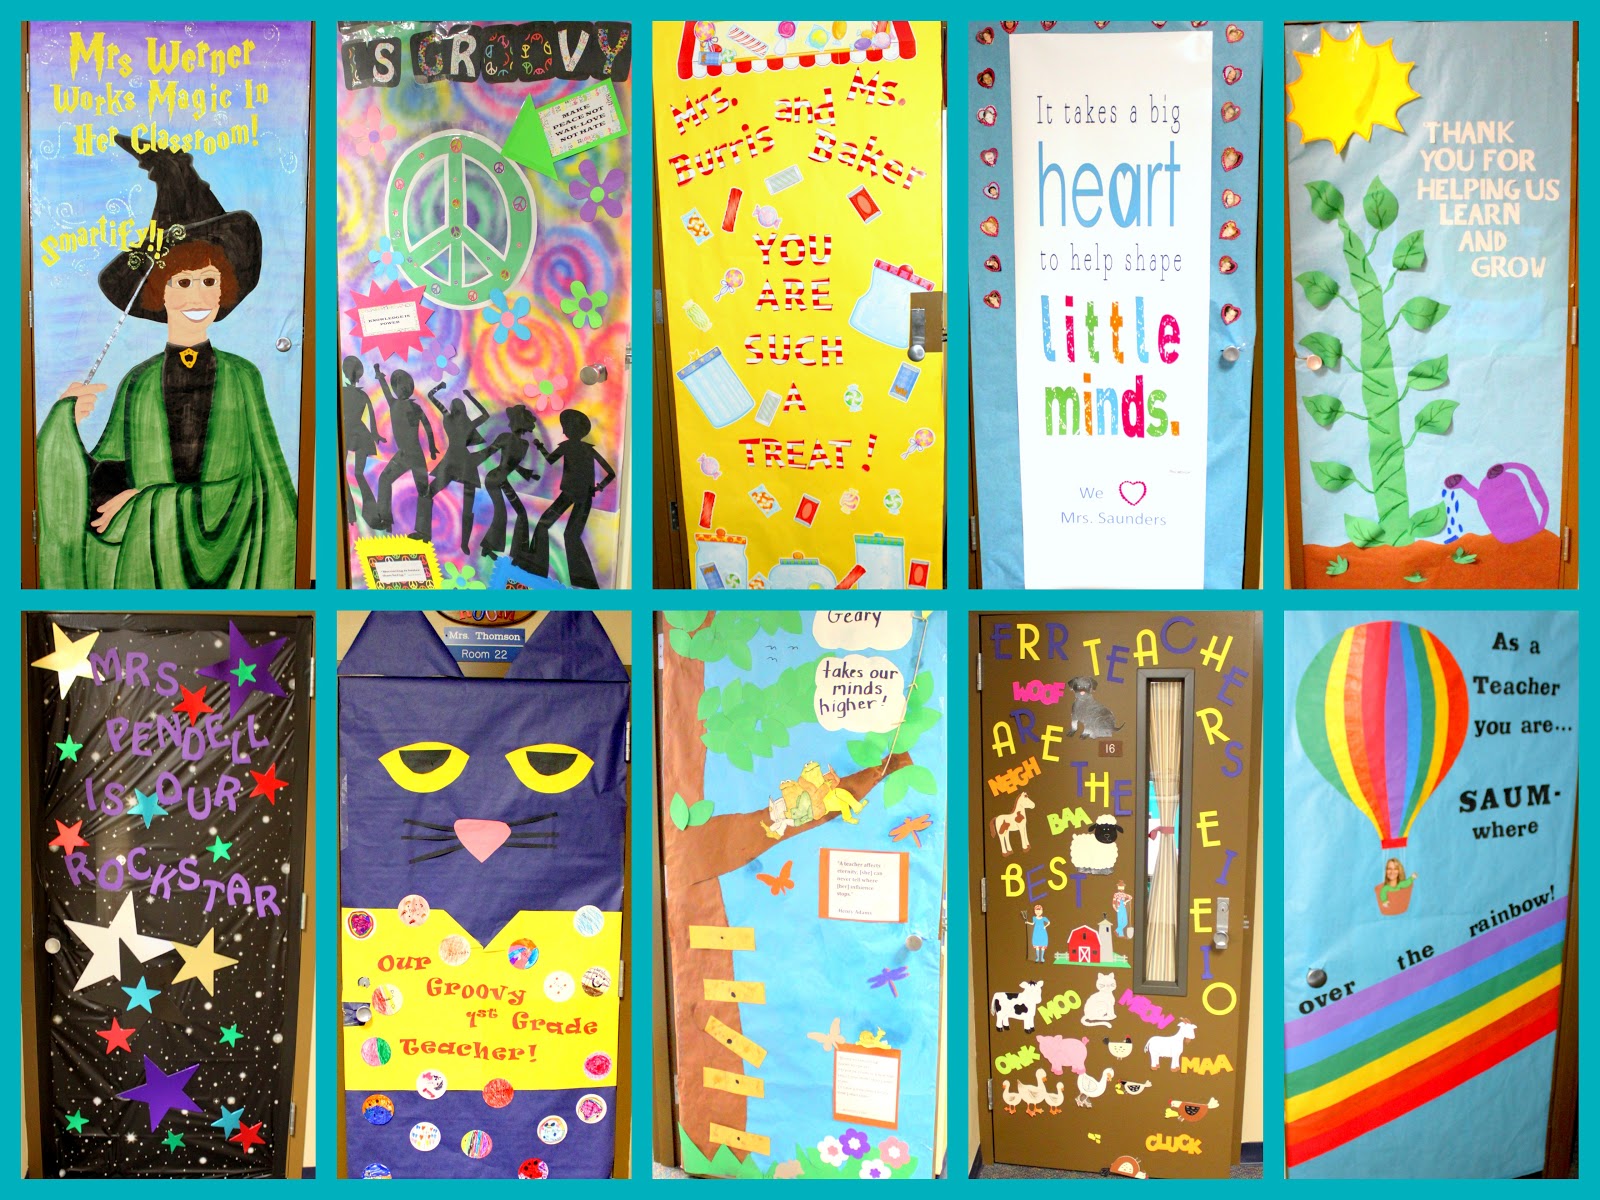 Harry Potter Door Decorations - Teacher Appreciation - Party Ideas for Real  People